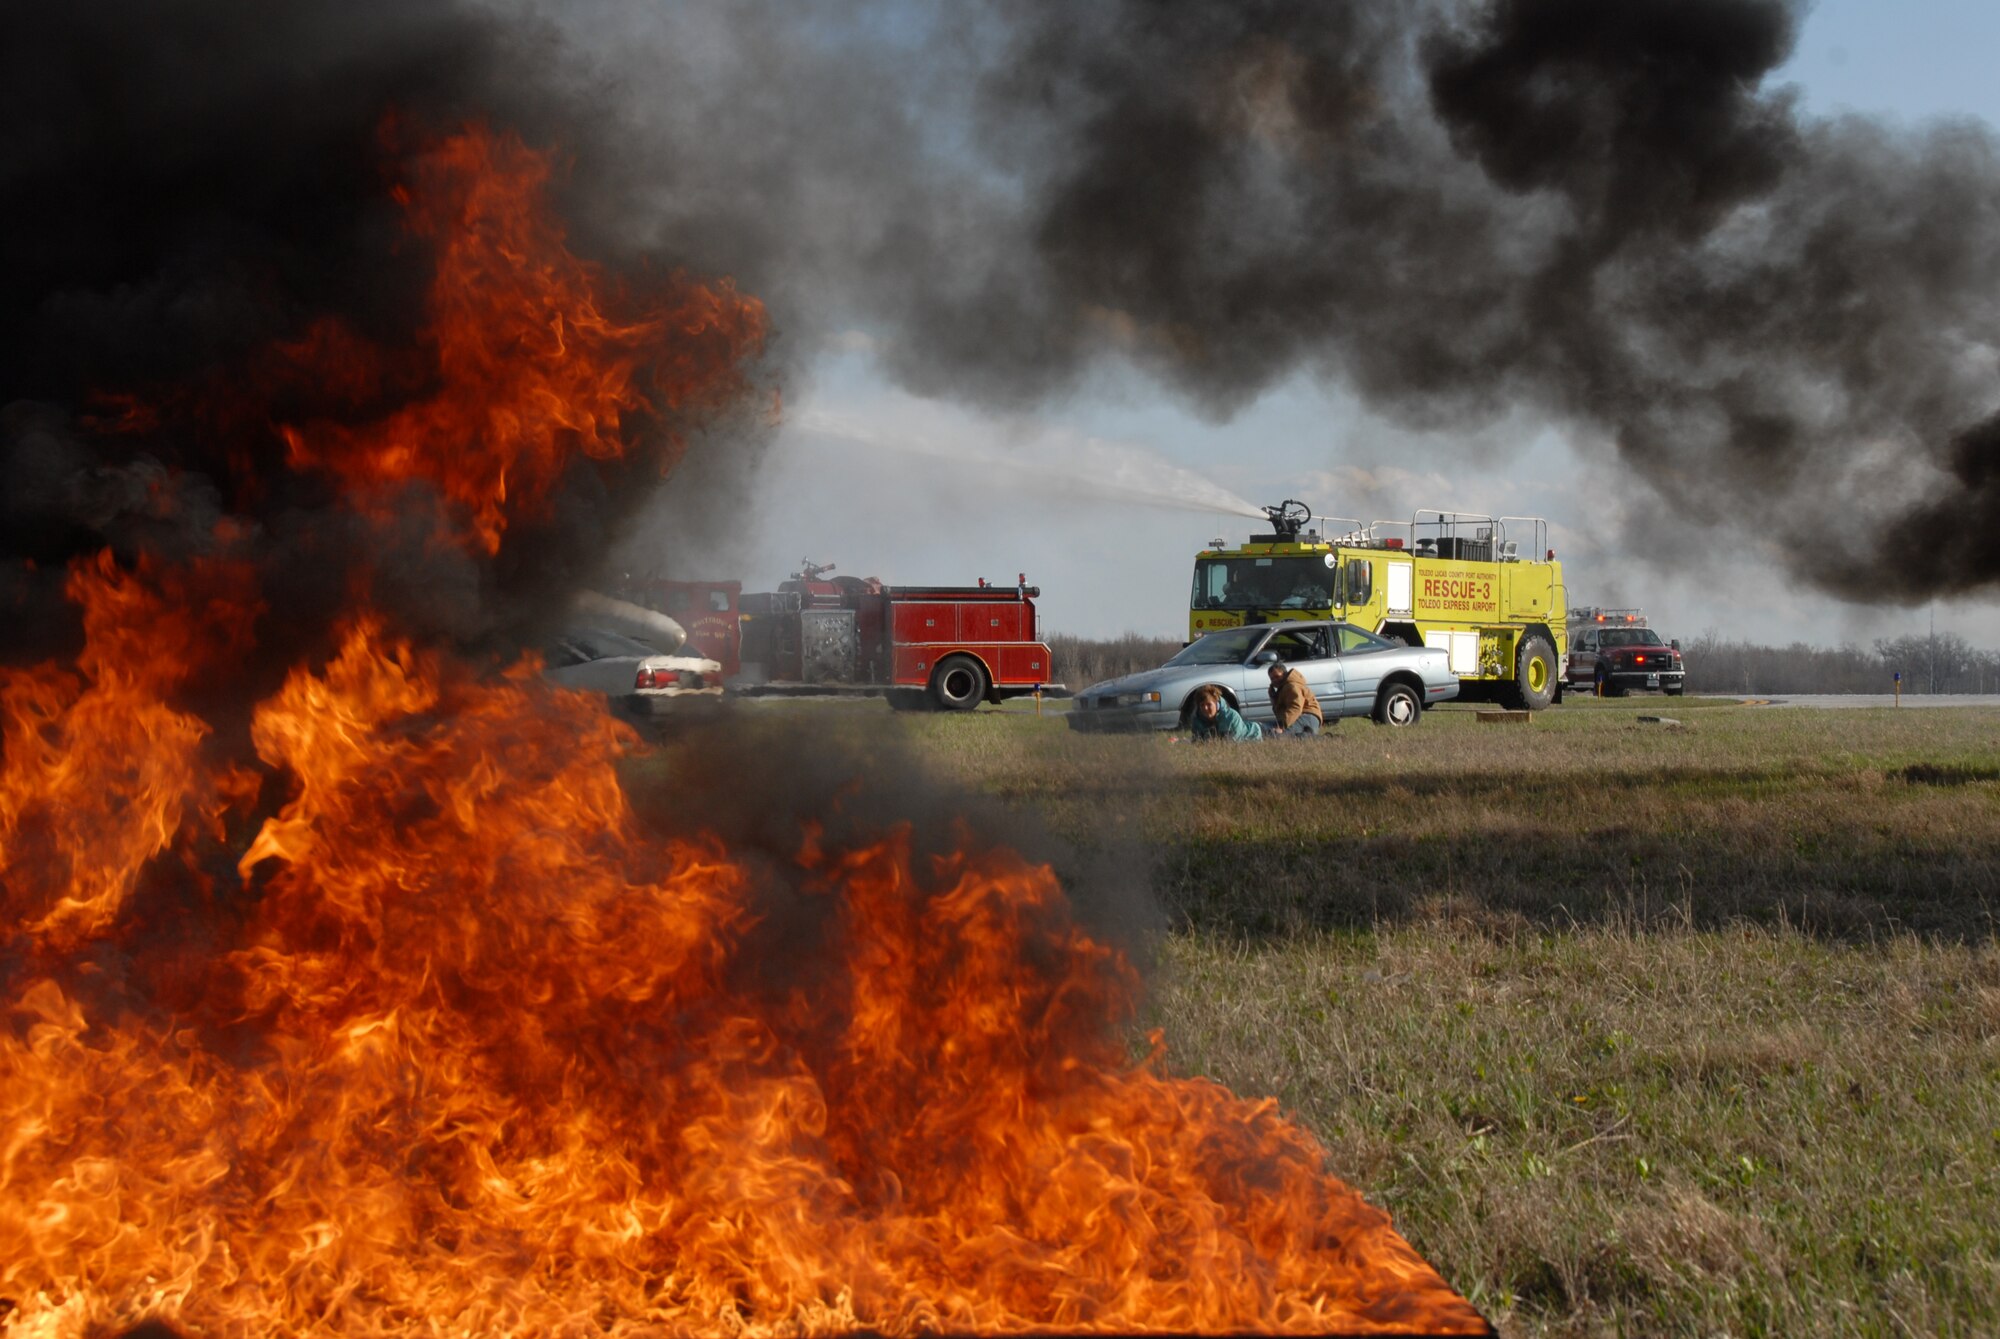 Members of the 180th Fighter Wing fire department participated in an aircraft crash and recovery exercise at the Toledo Express Airport on April 22. The drill, required every three years, not only tests the response of airport authorities, but also the response of other local emergency, fire and rescue crews that would normally respond to such an incident, to include the 180th FW fire department.  (Air Force photo taken by SrA Jodi Leininger, released by TSgt Beth Holliker.)